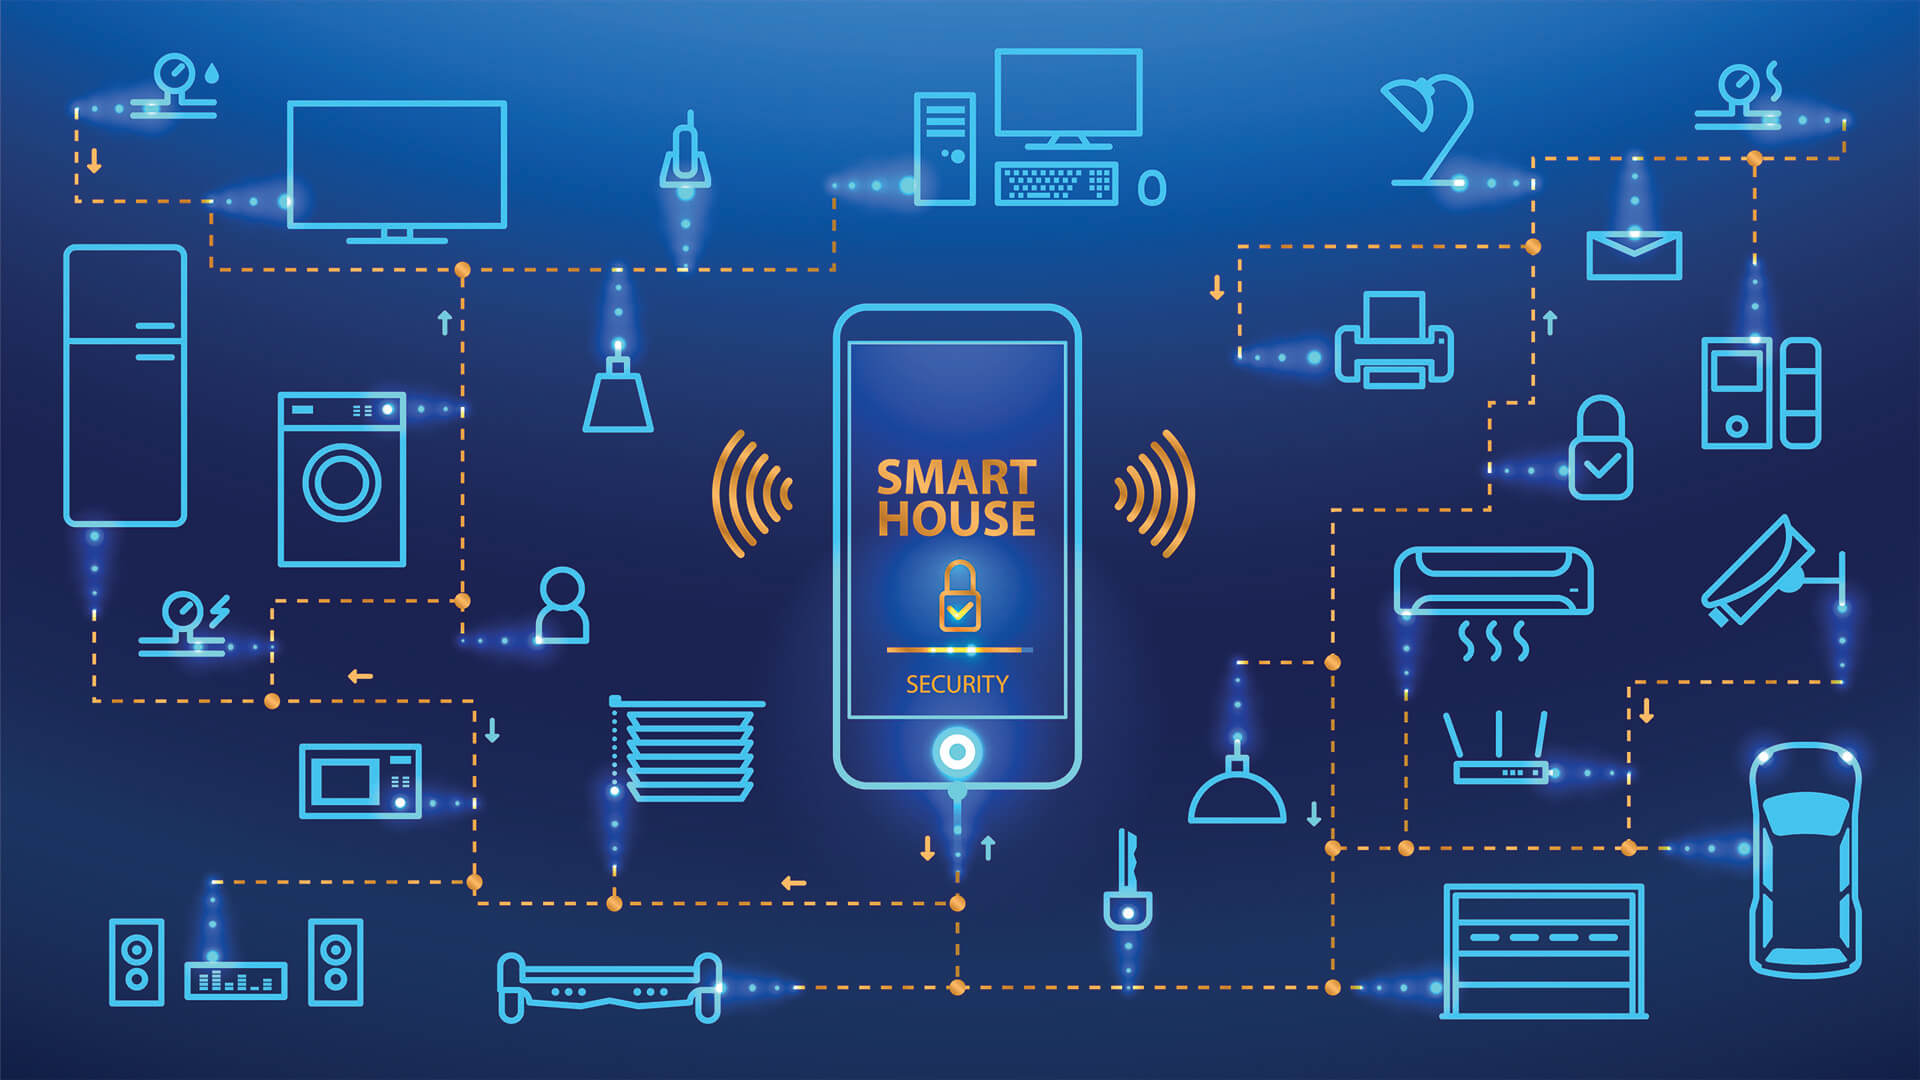 Tips On Turning A Dumb Home Into A Smart Home The Computer Warriors